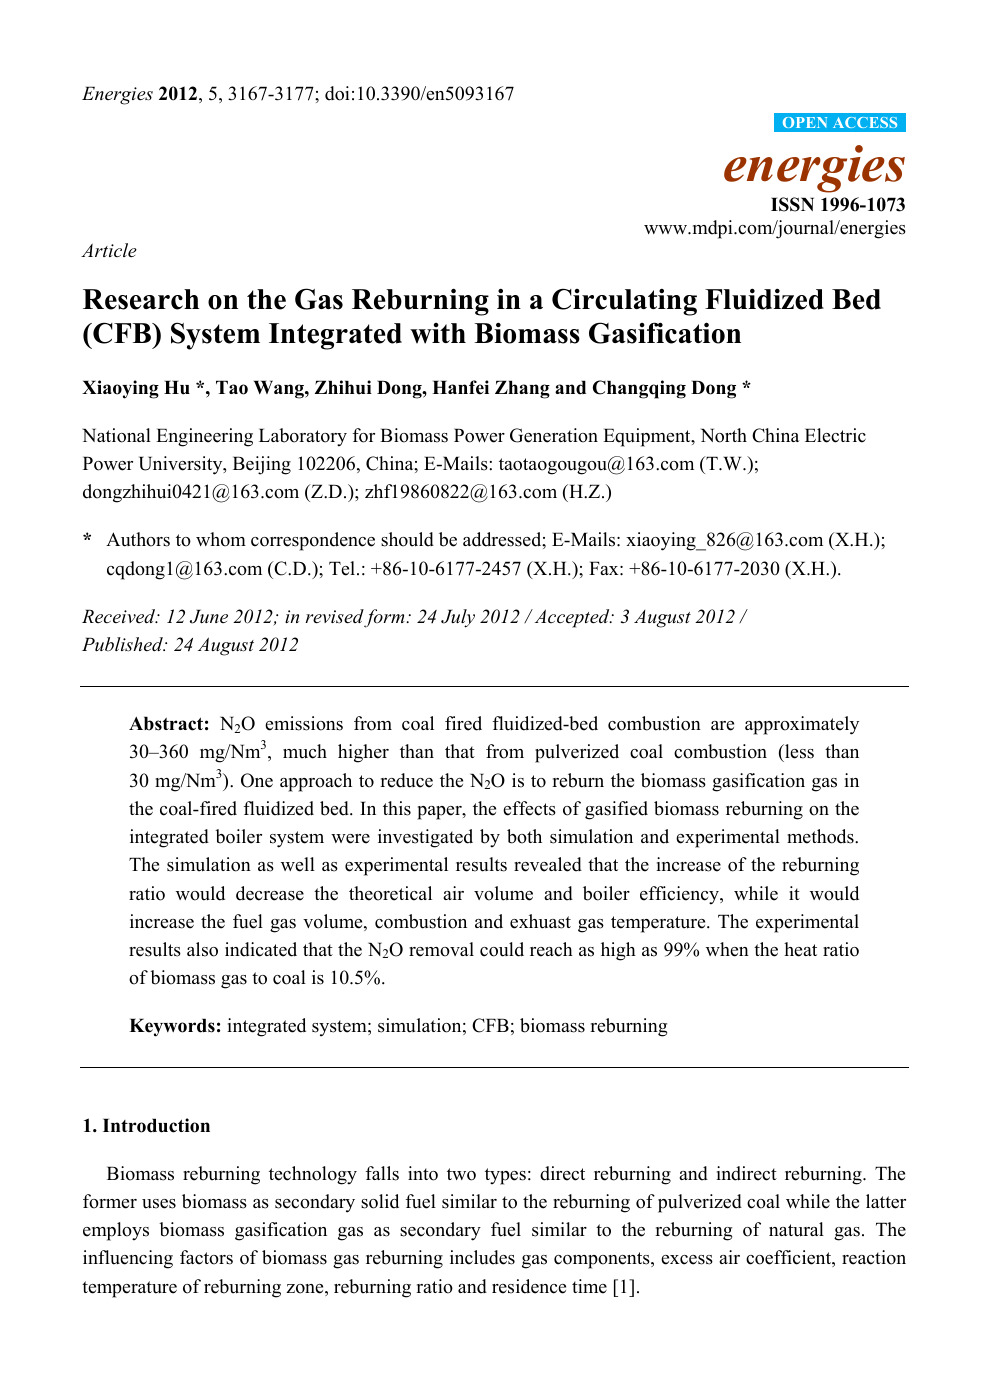 Research On The Gas Reburning In A Circulating Fluidized Bed Cfb System Integrated With Biomass Gasification Topic Of Research Paper In Chemical Engineering Download Scholarly Article Pdf And Read For Free